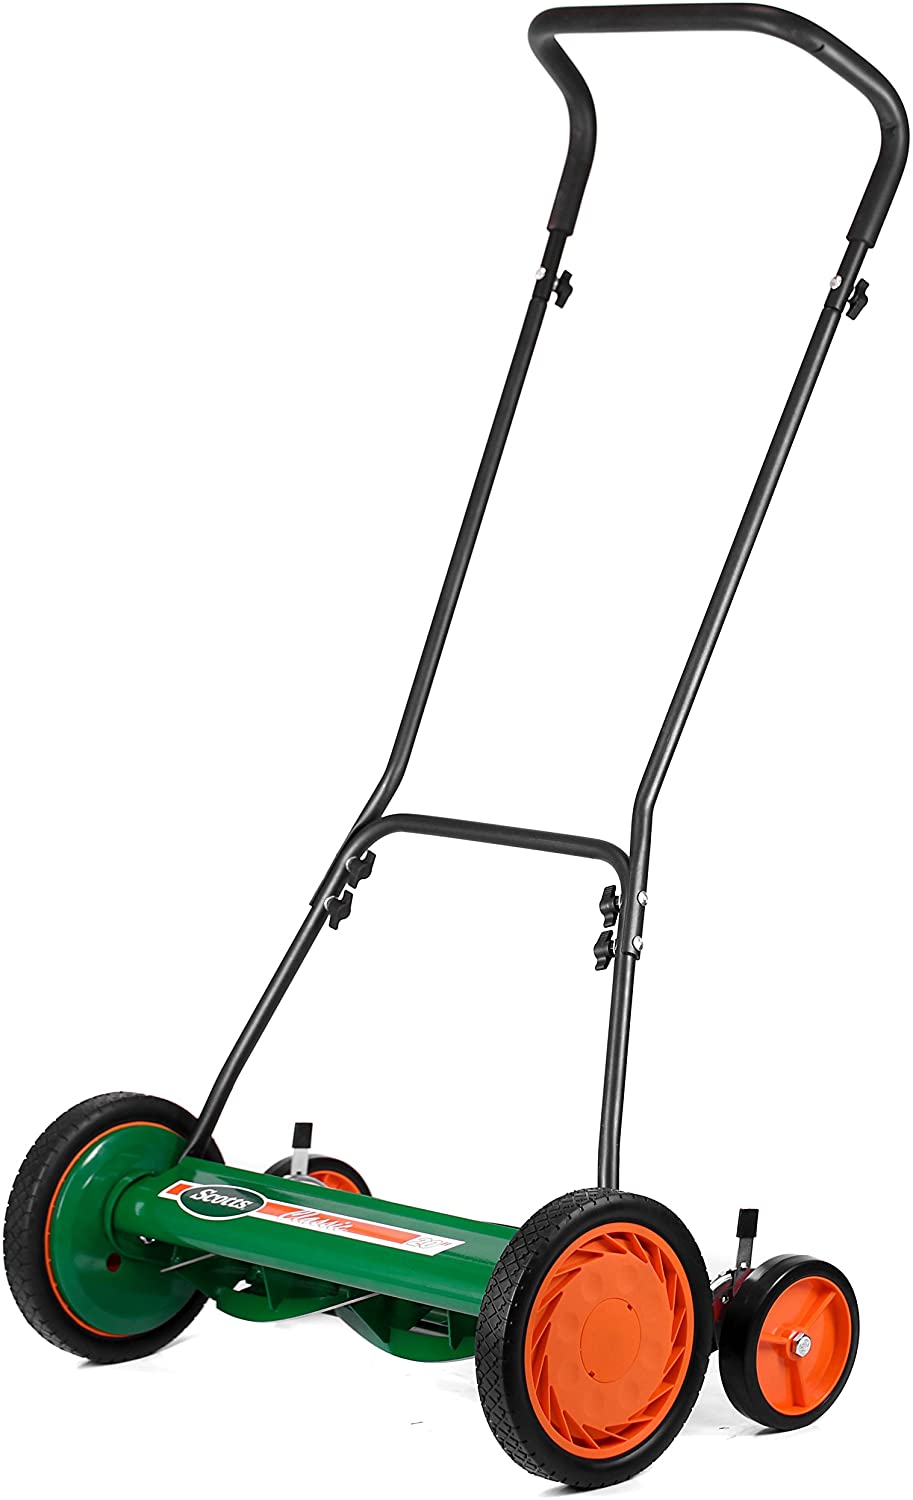 Scotts Outdoor Power Tools 2000-20S 20-Inch 5-Blade Classic Push Reel Lawn Mower - image 1 of 10